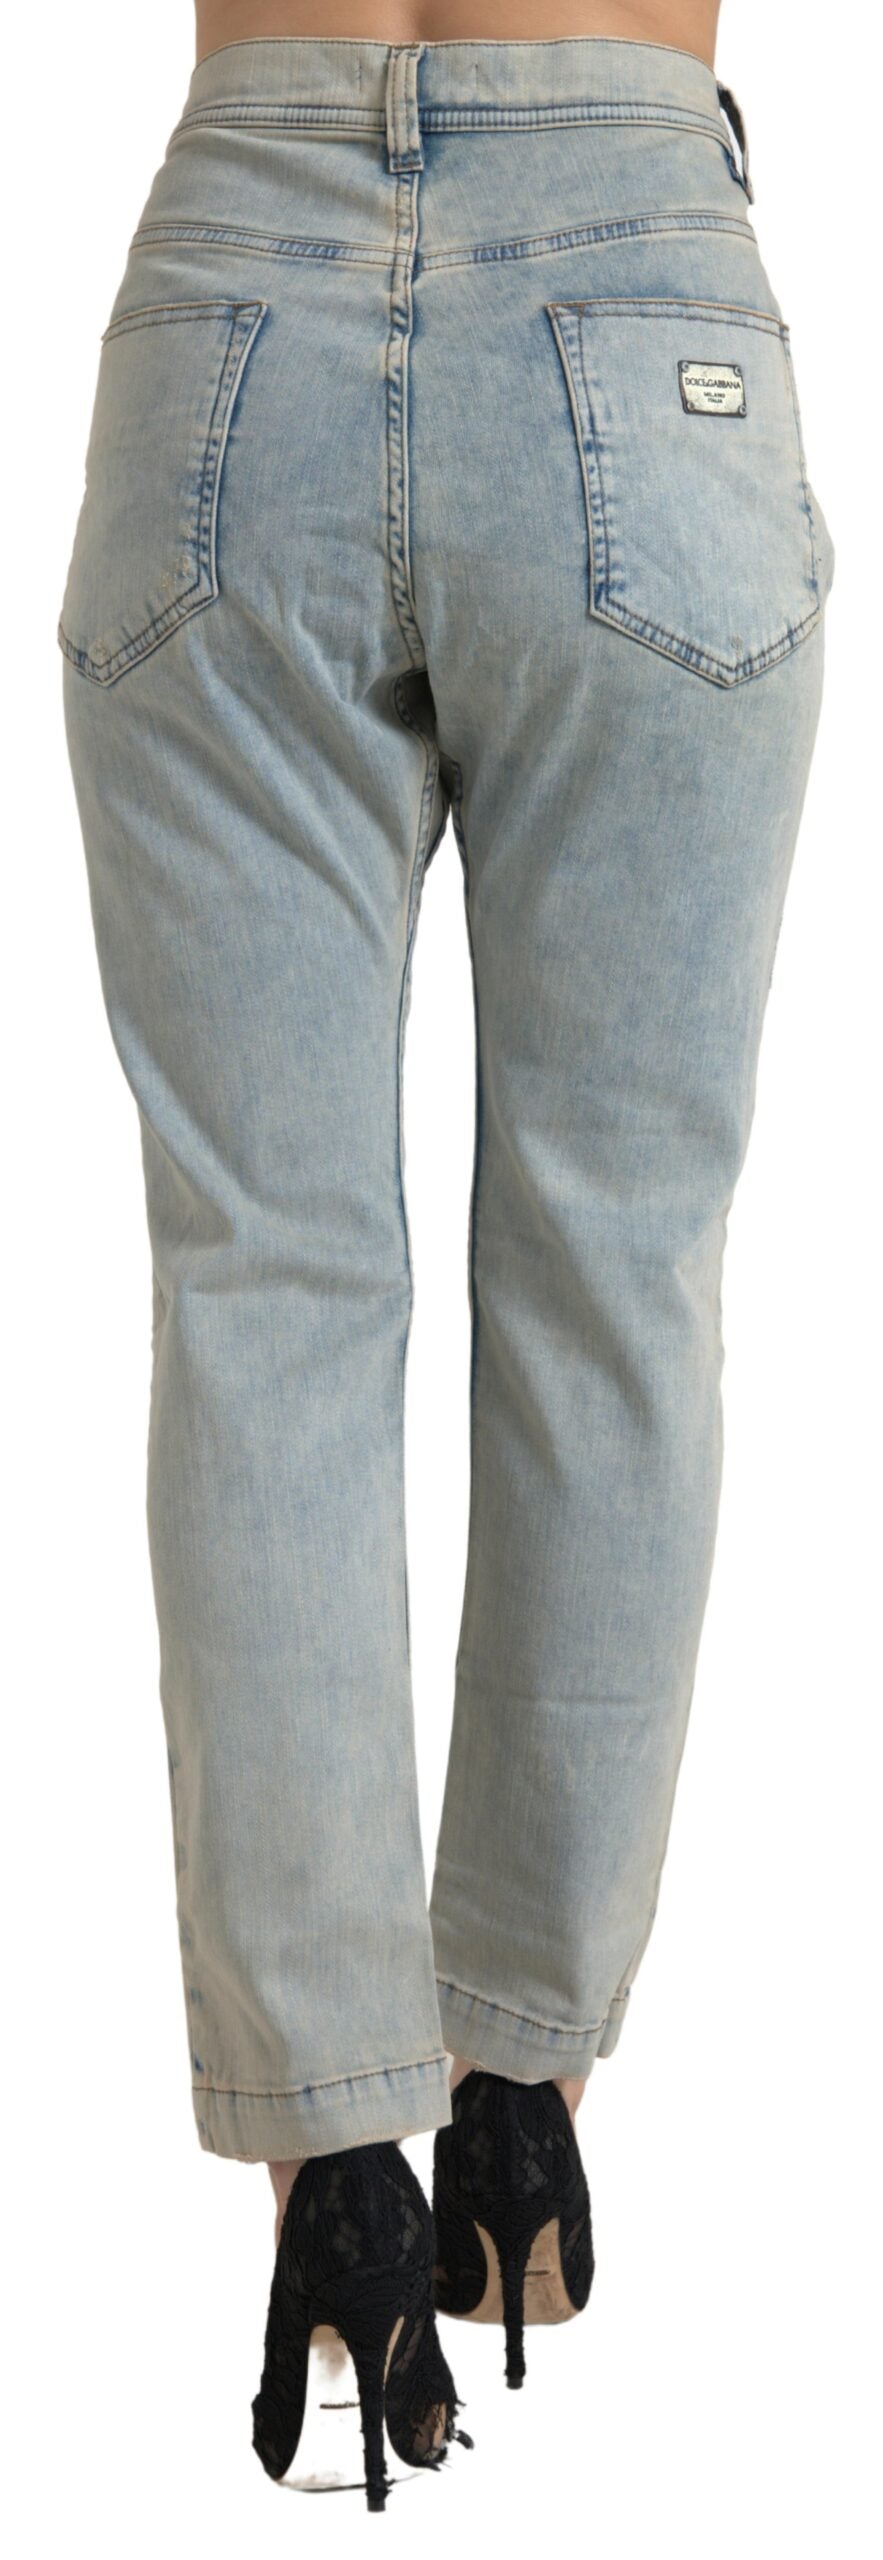 Dolce & Gabbana Blue Washed Cotton Mid Waist Skinny Jeans